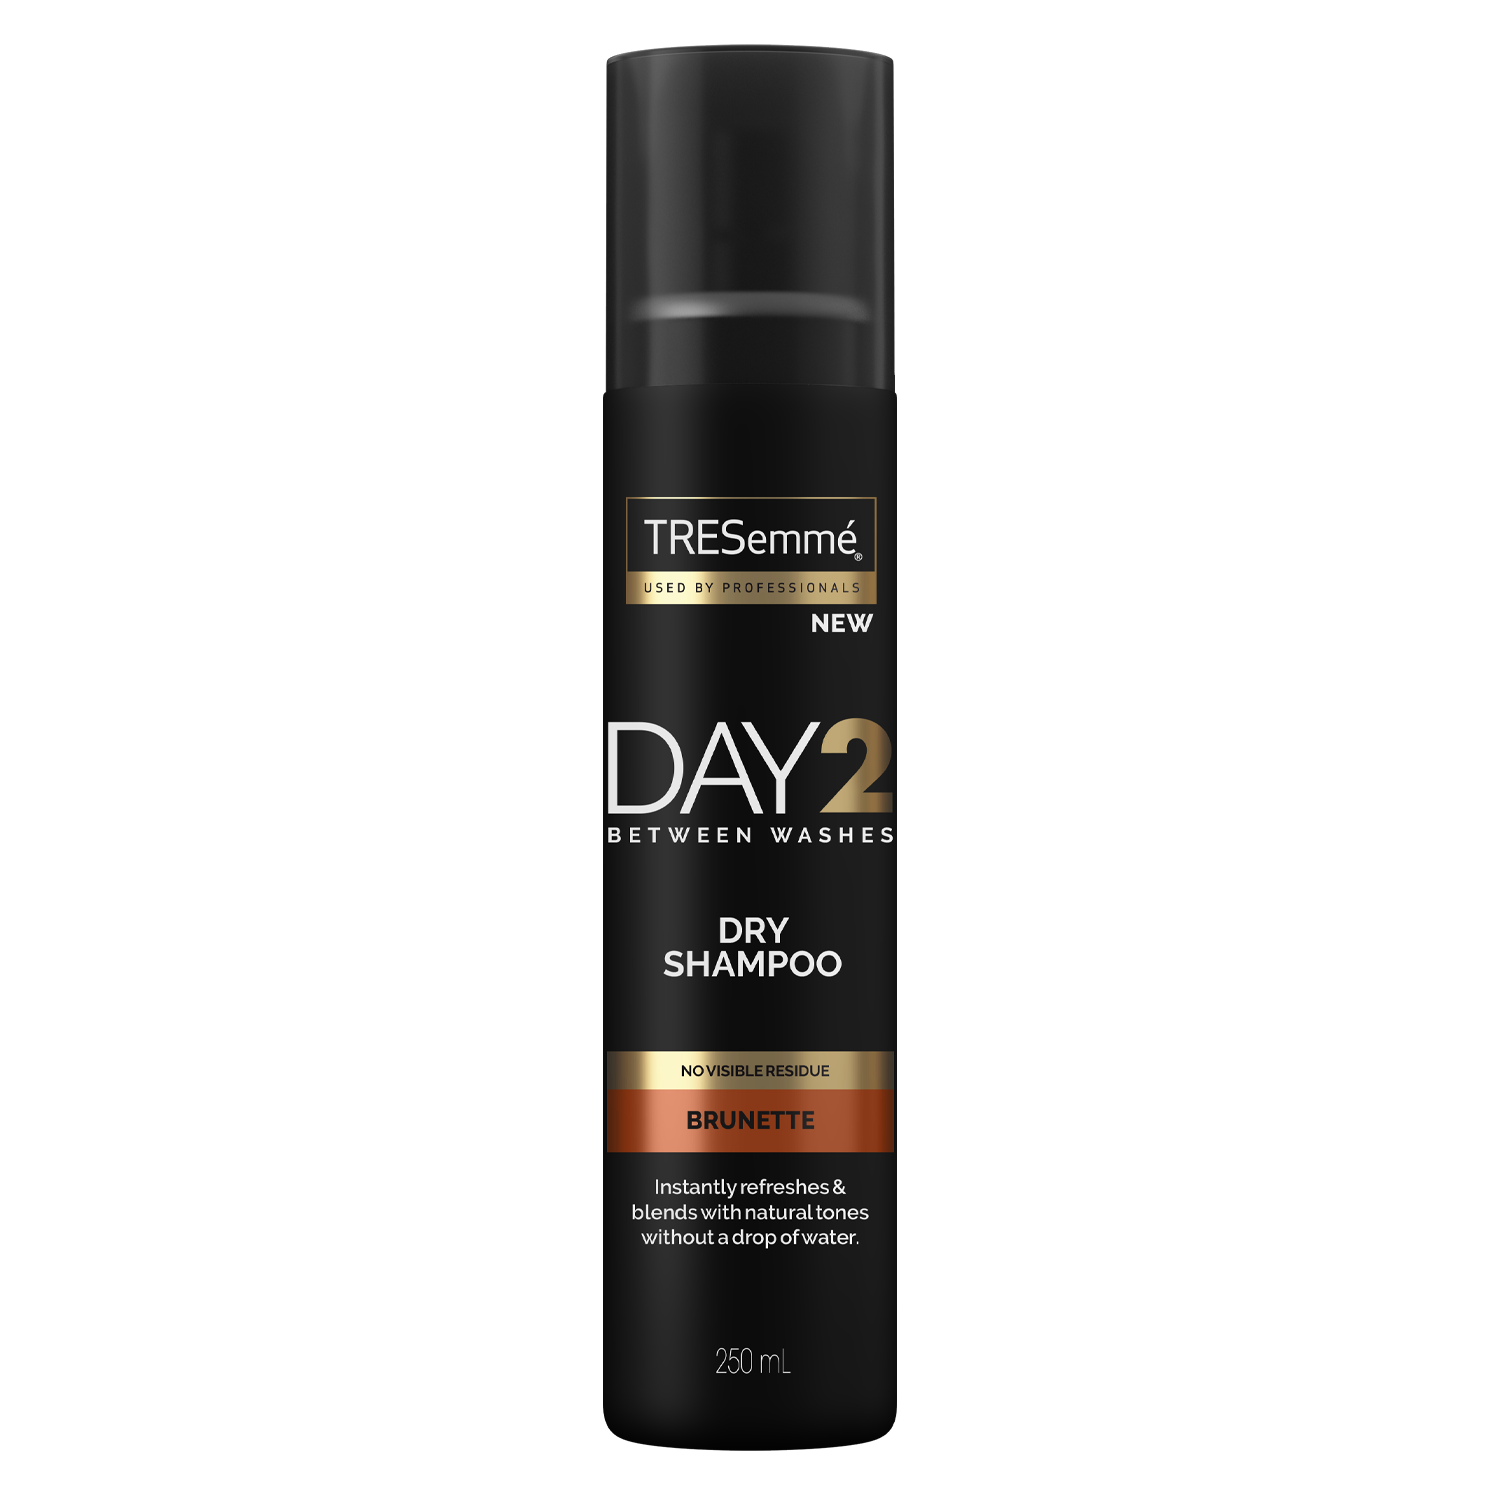 A 250ml can of TRESemme Day2 Brunette Dry Shampoo